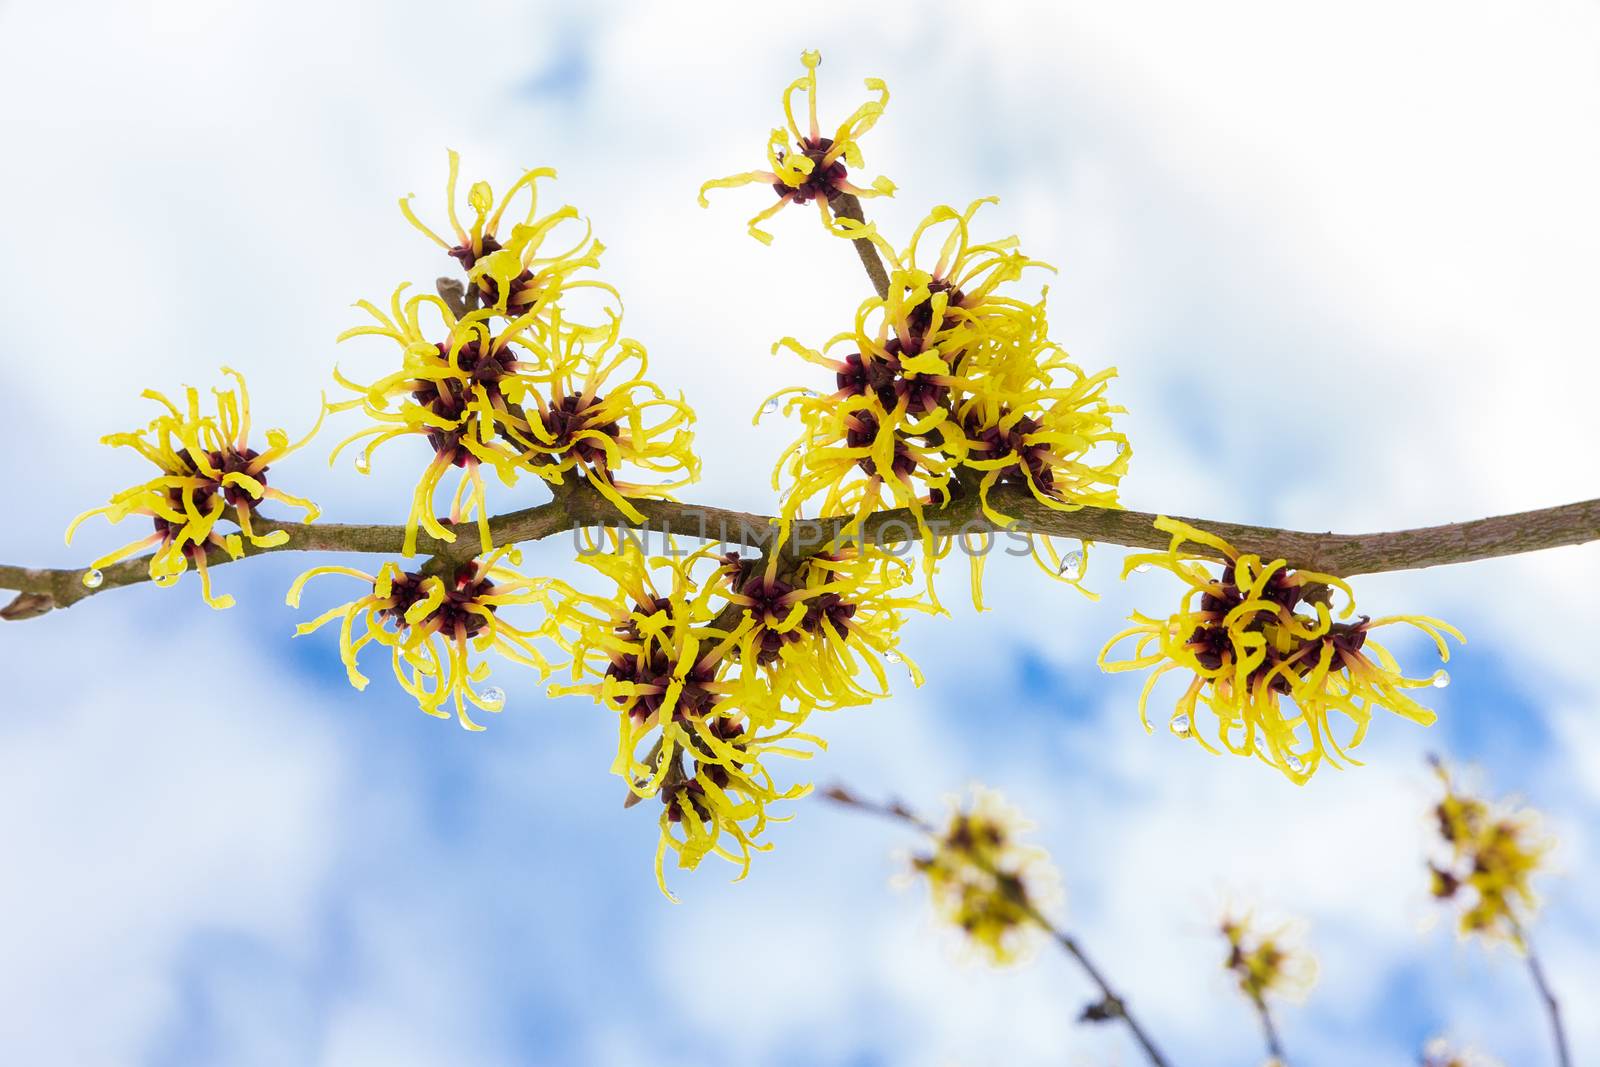 Hamamelis mollis with yellow flowers clouds and blue sky by BenSchonewille